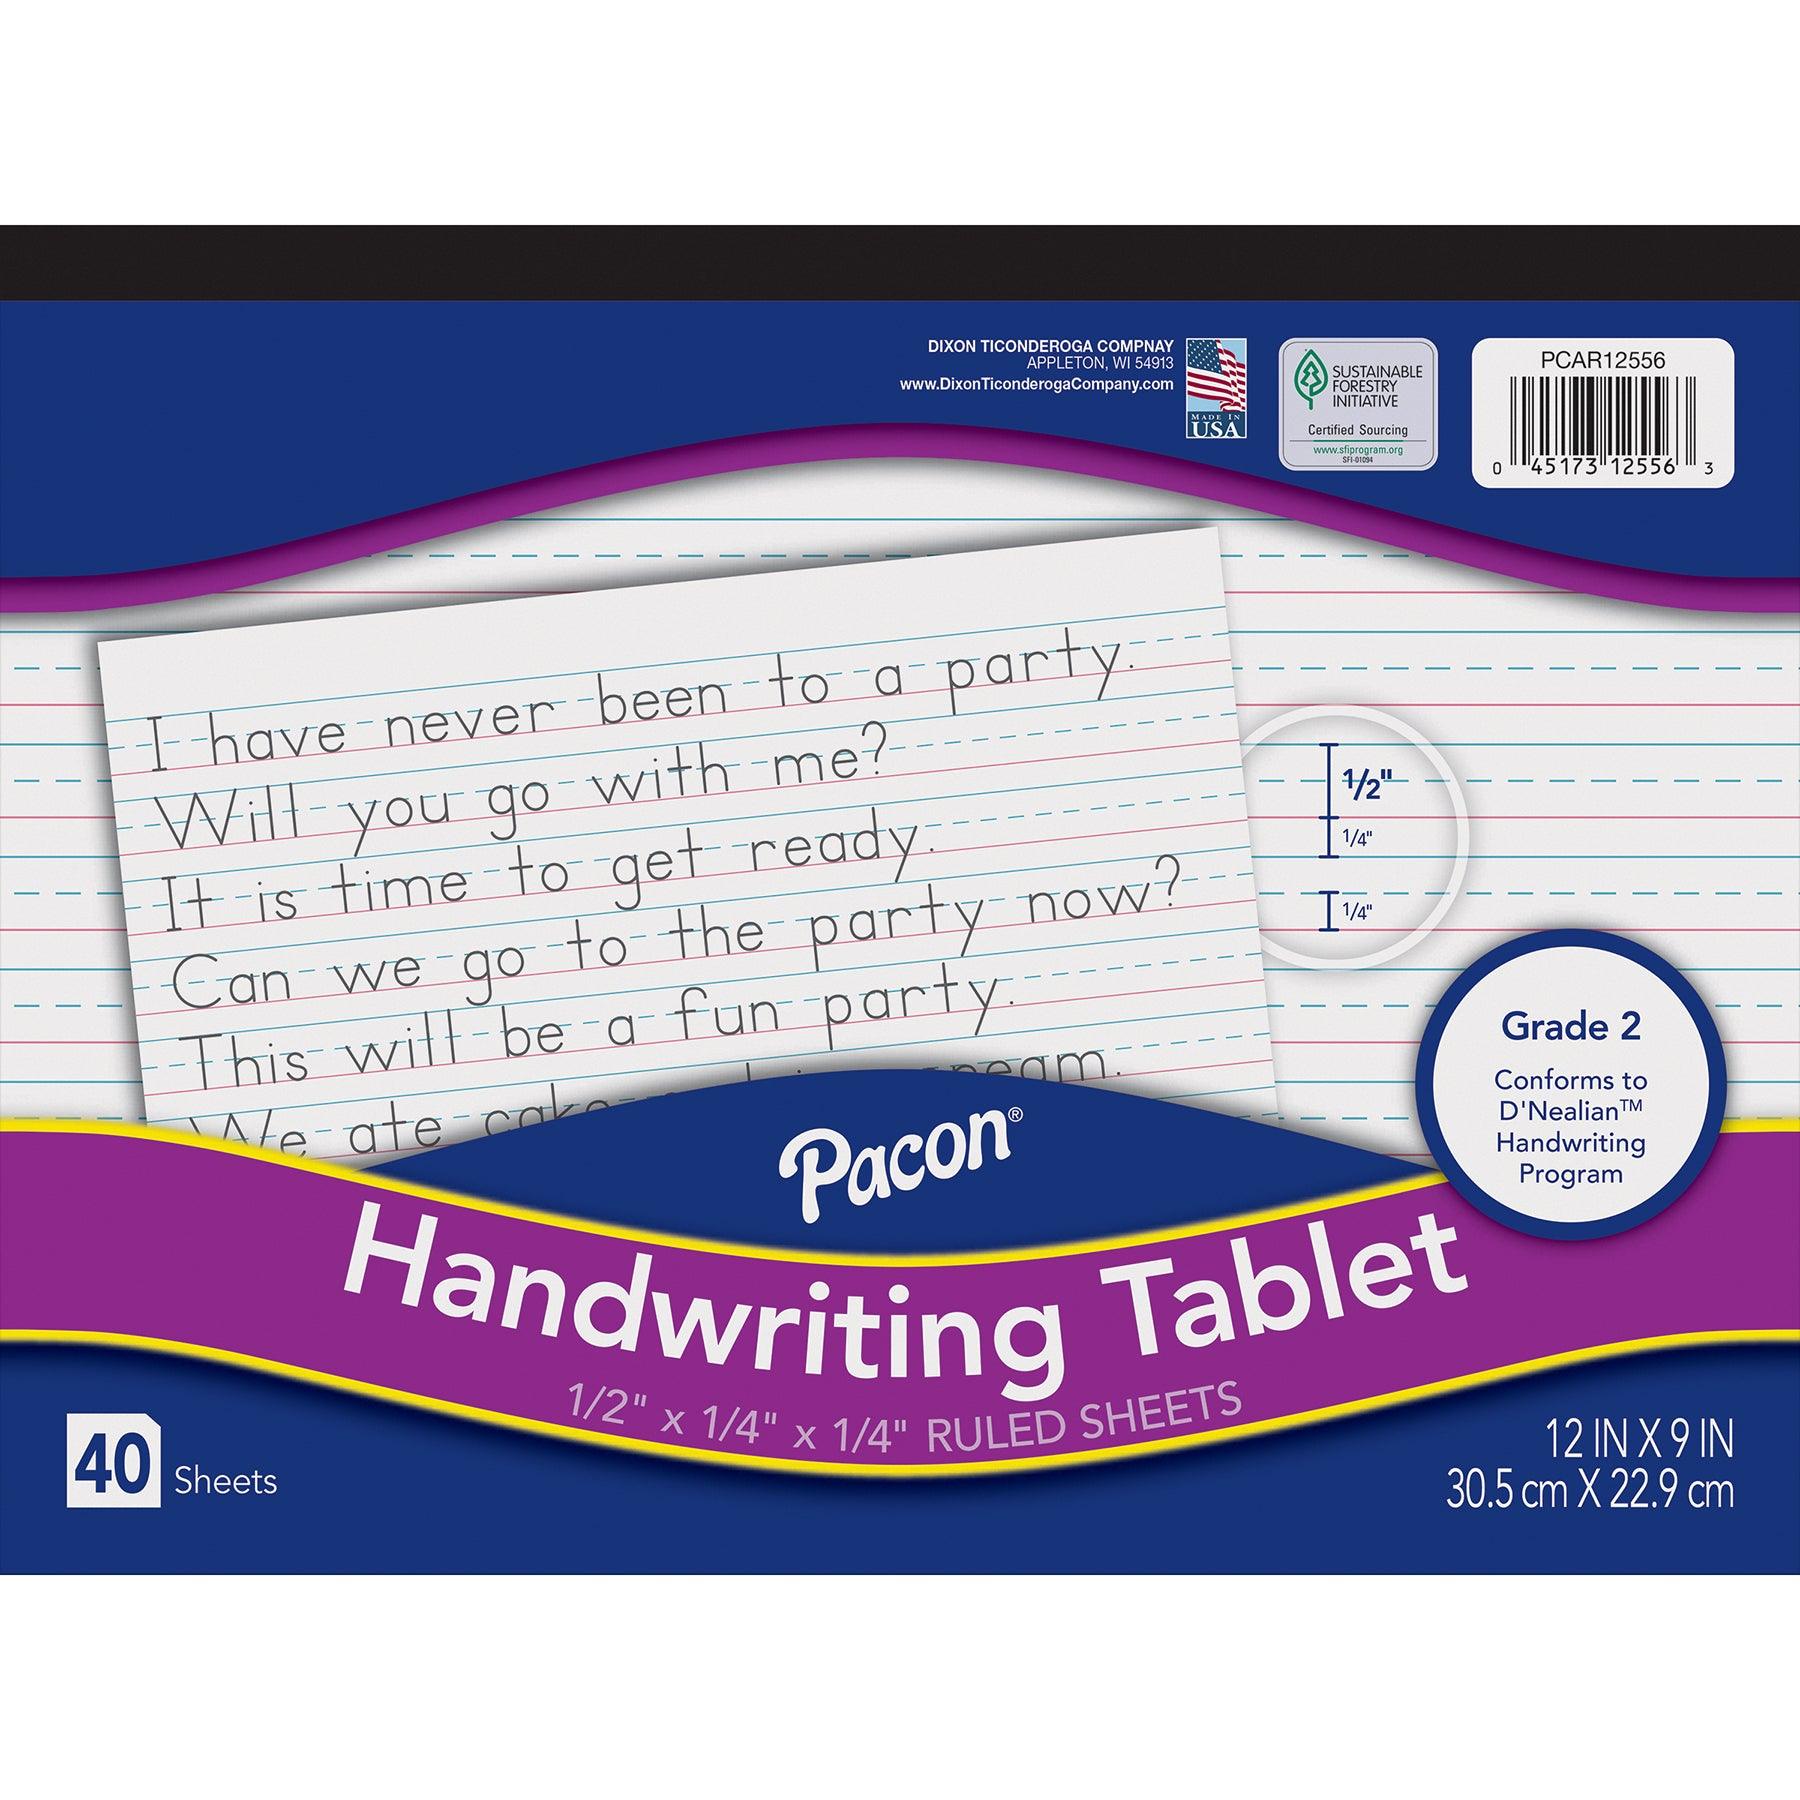 Handwriting Tablet, White, 1/2 in x 1/4 in x 1/4 in Ruled Long, 12" x 9", 40 Sheets, Pack of 12 - Loomini